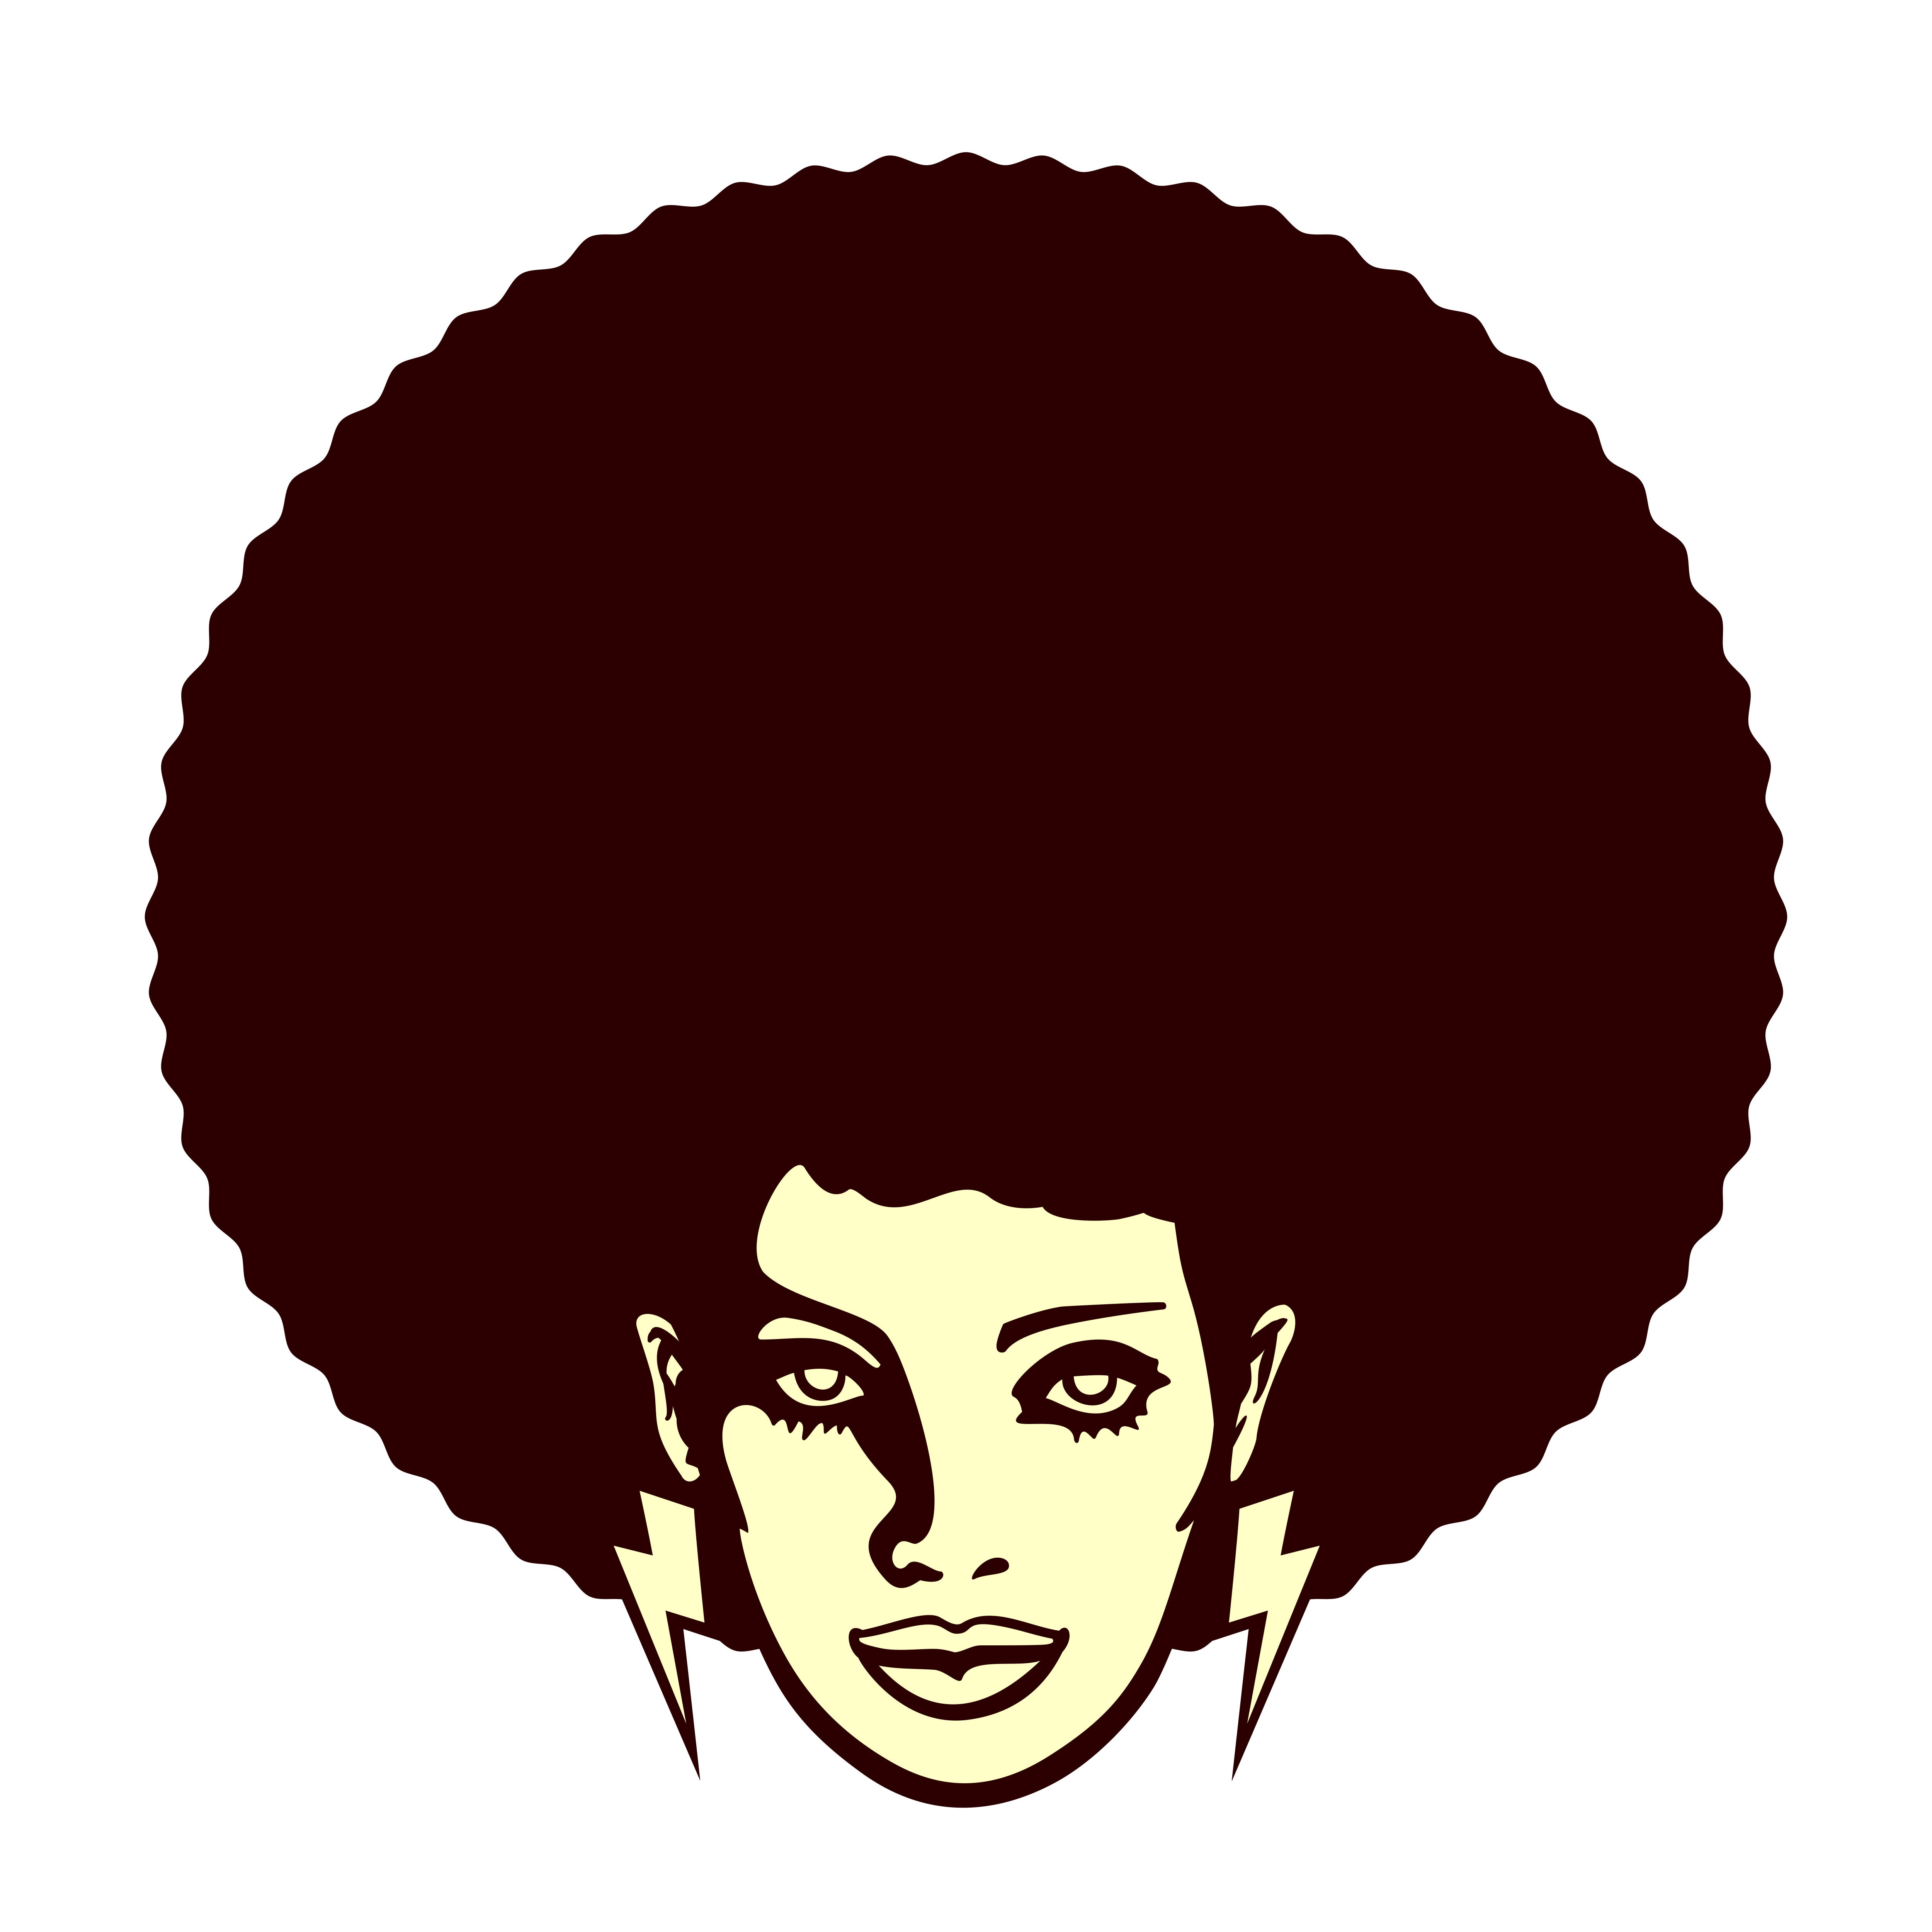 comic-type illustration of person, appears to be woman, with afro